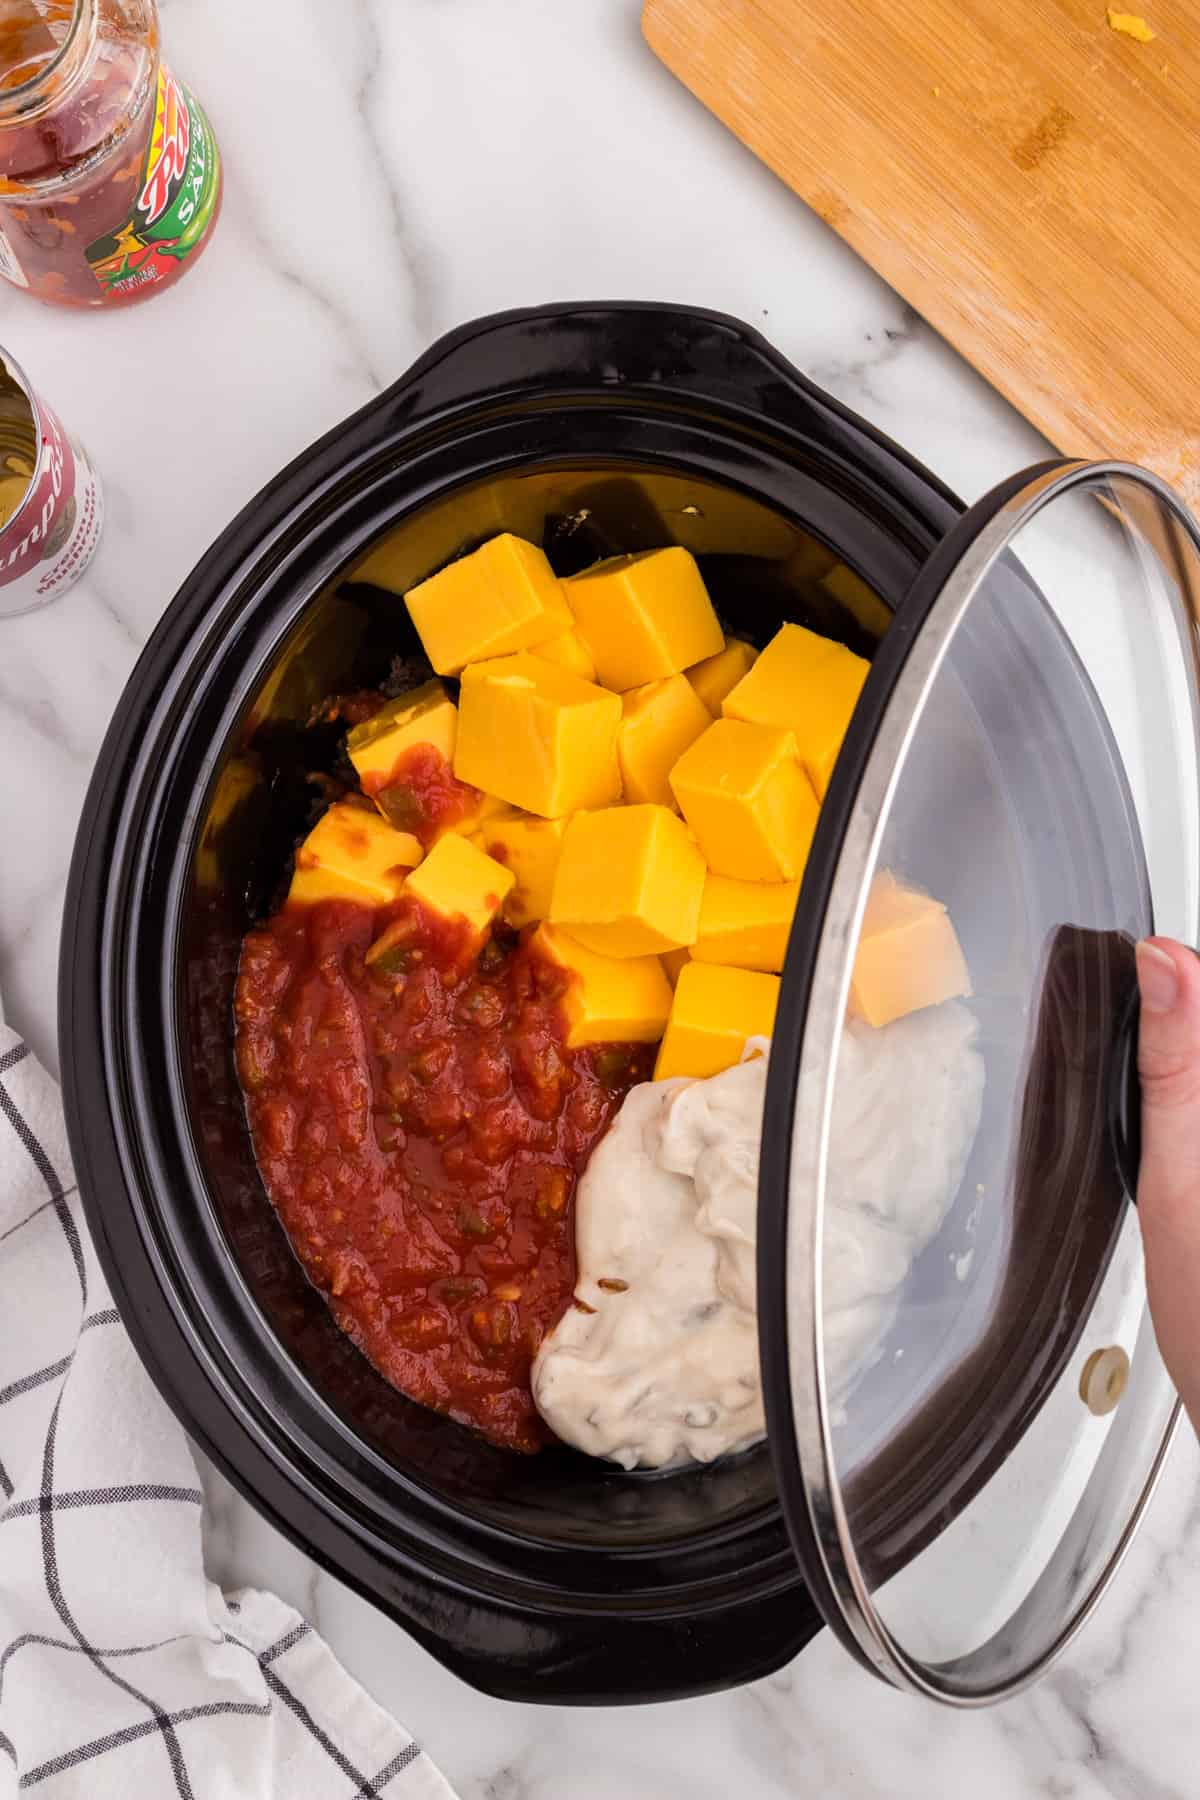 Covering crock pot with lid for Hamburger Cheese Dip recipe